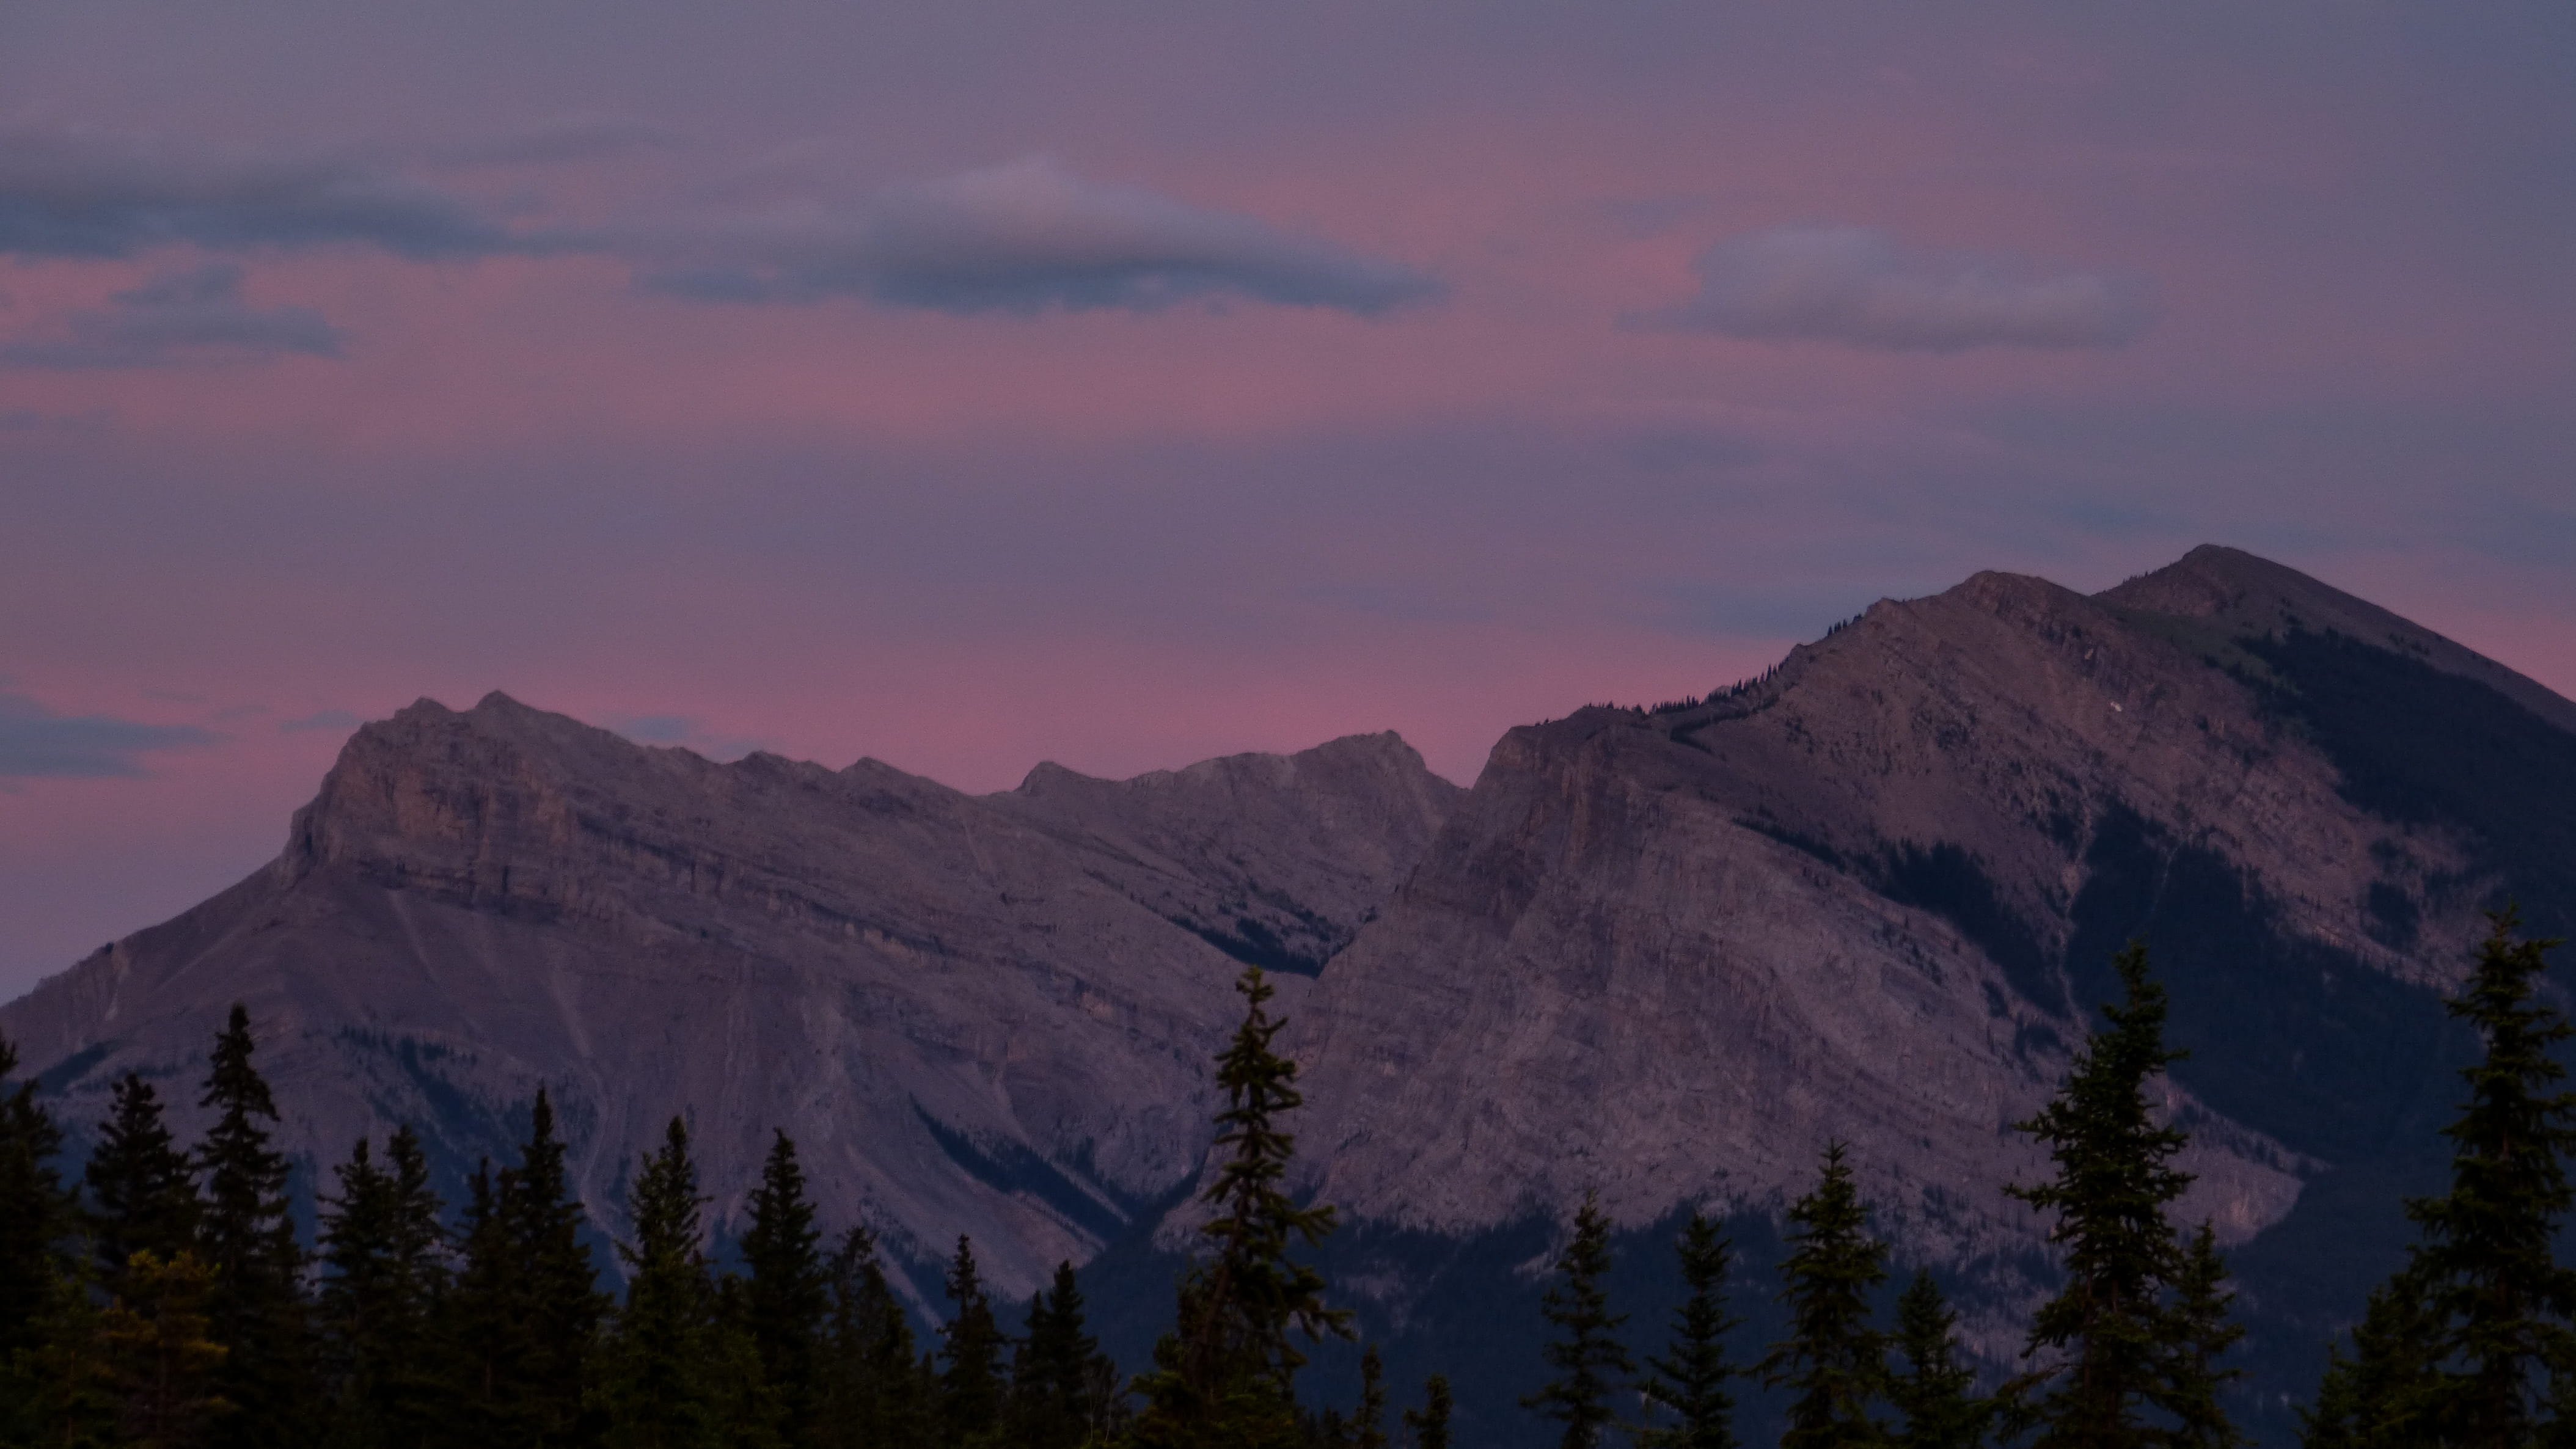 canada, canmore, sky, mountain, summer, sunsets, nature, outdoor